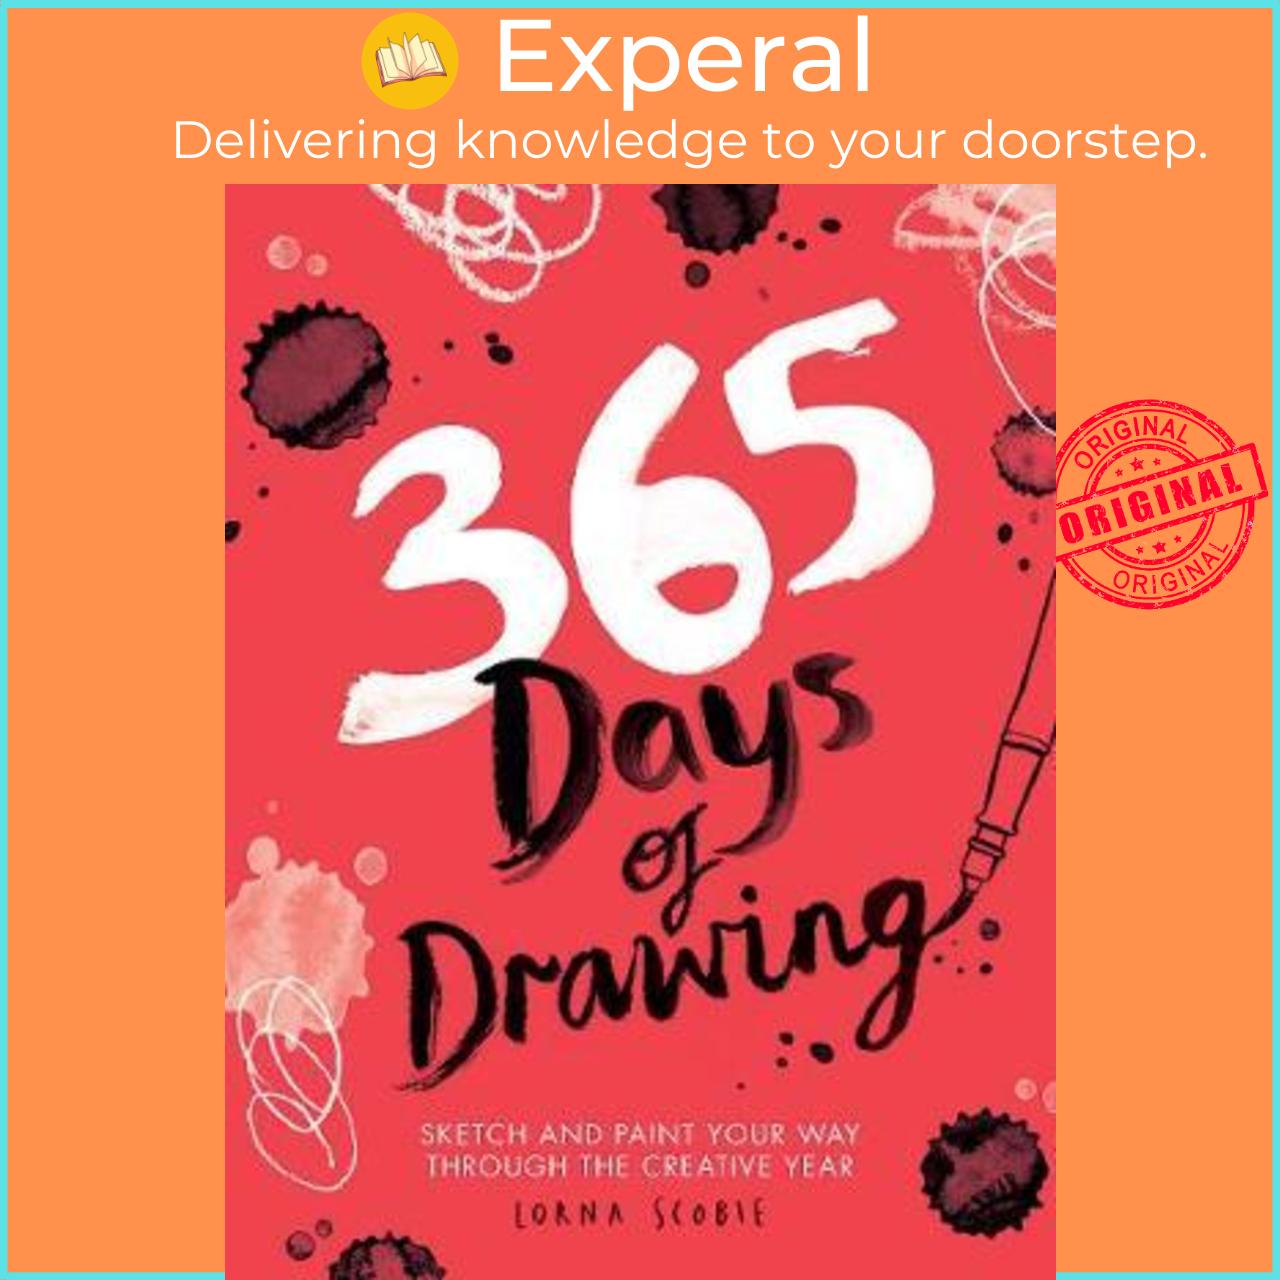 Sách - 365 Days of Drawing : Sketch and Paint Your Way Through the Creative Year by Lorna Scobie (UK edition, paperback)